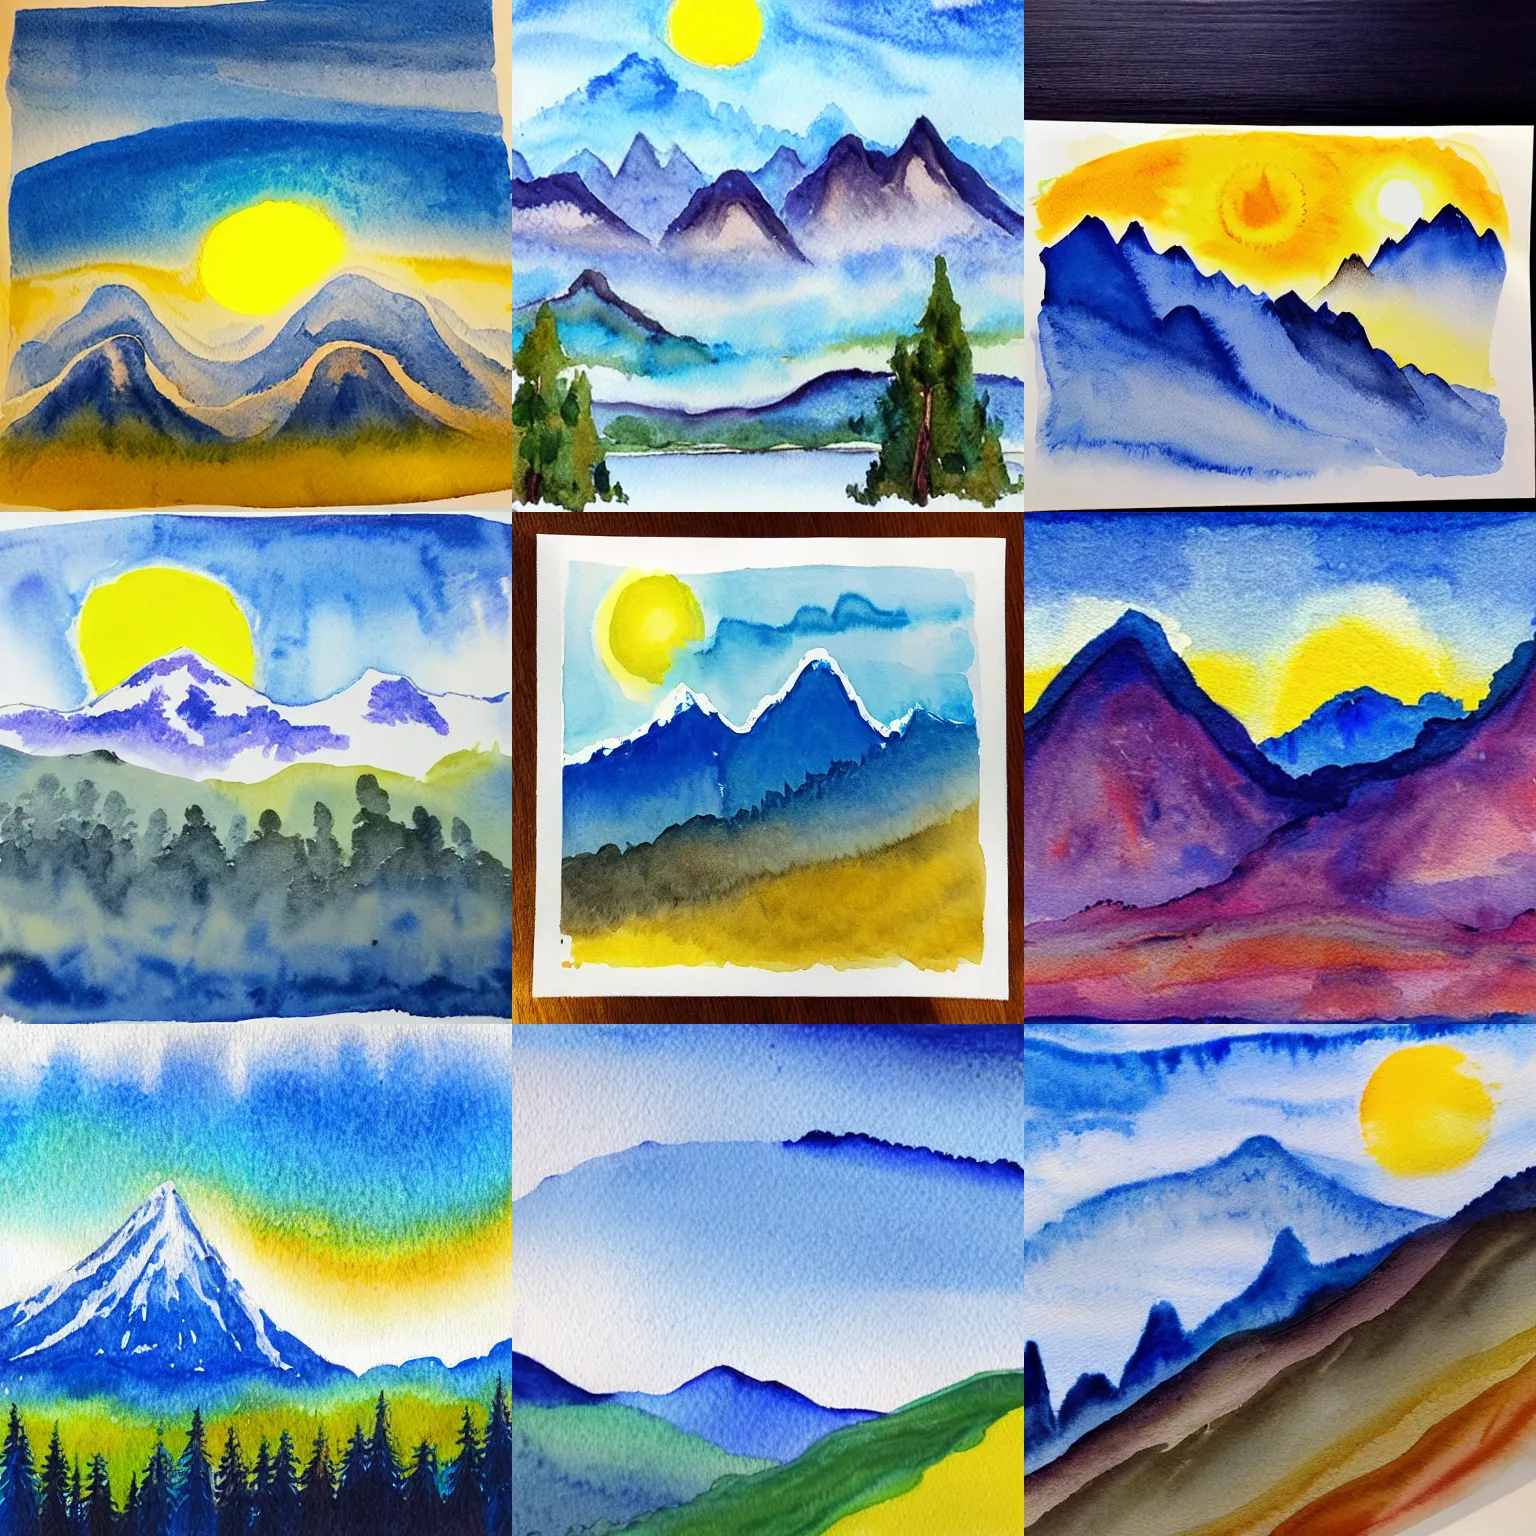 water color painting of layered blue mountains with a